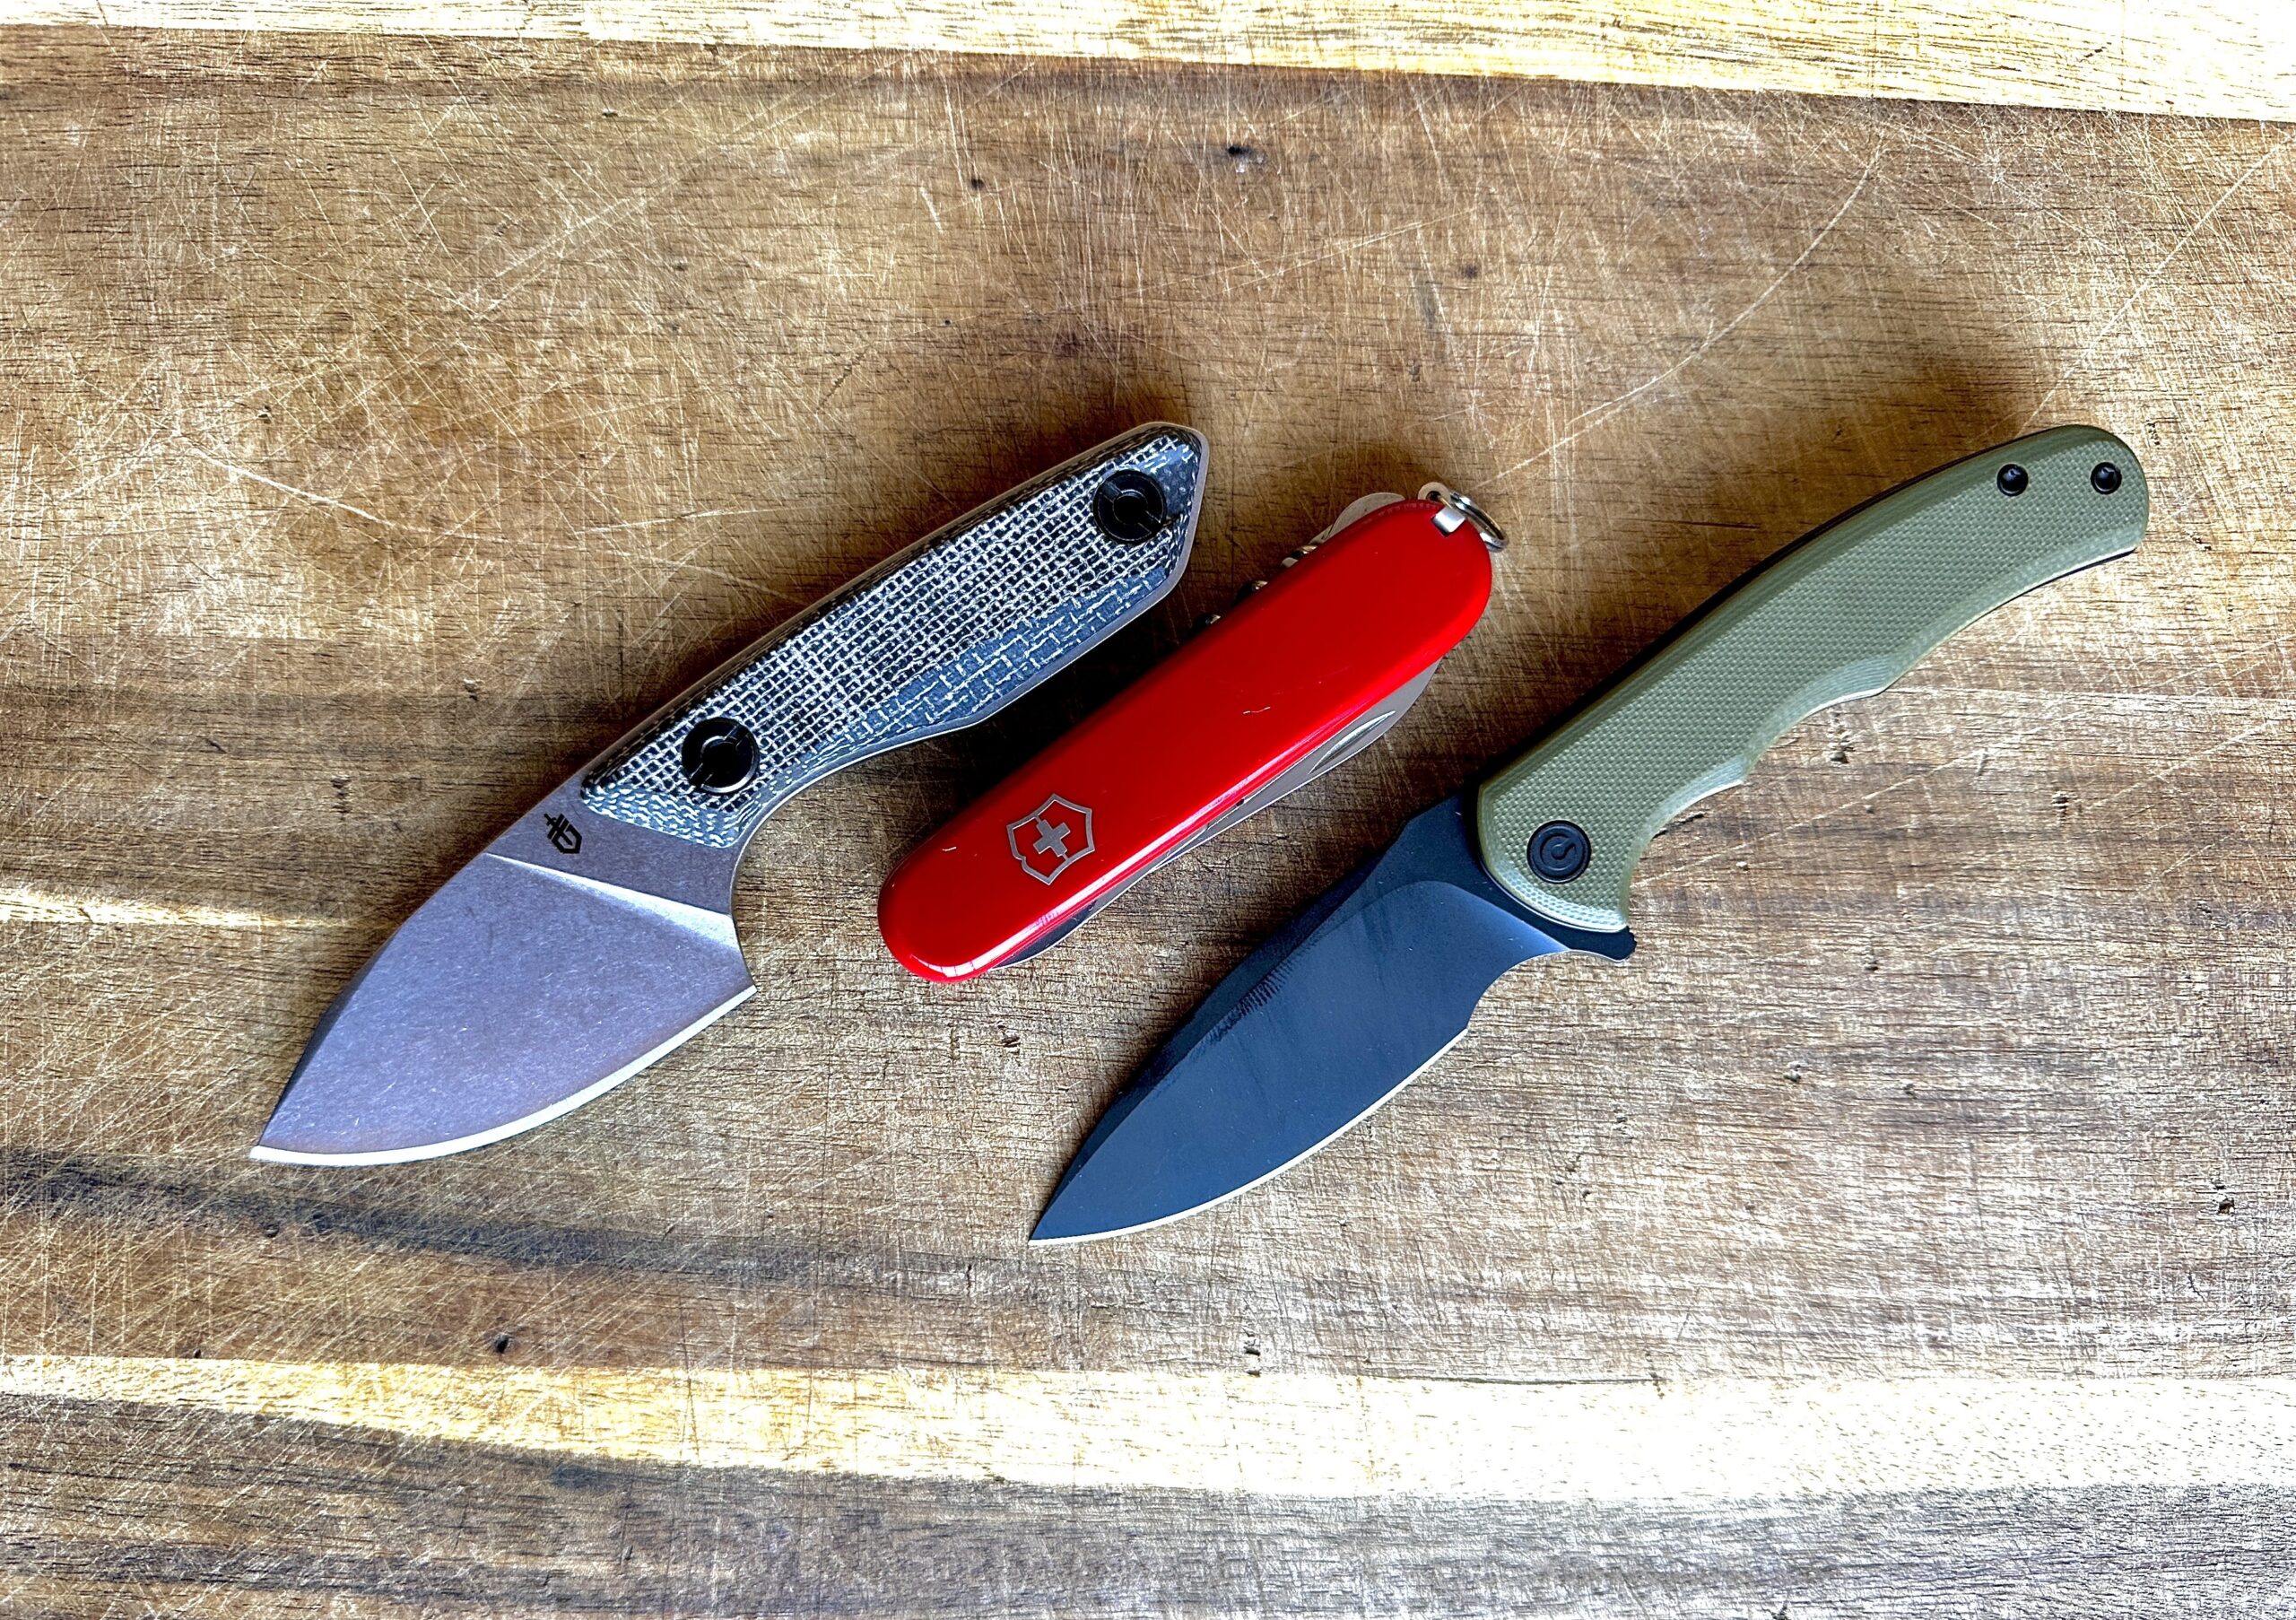 The Best Cyber Monday Knife Deals